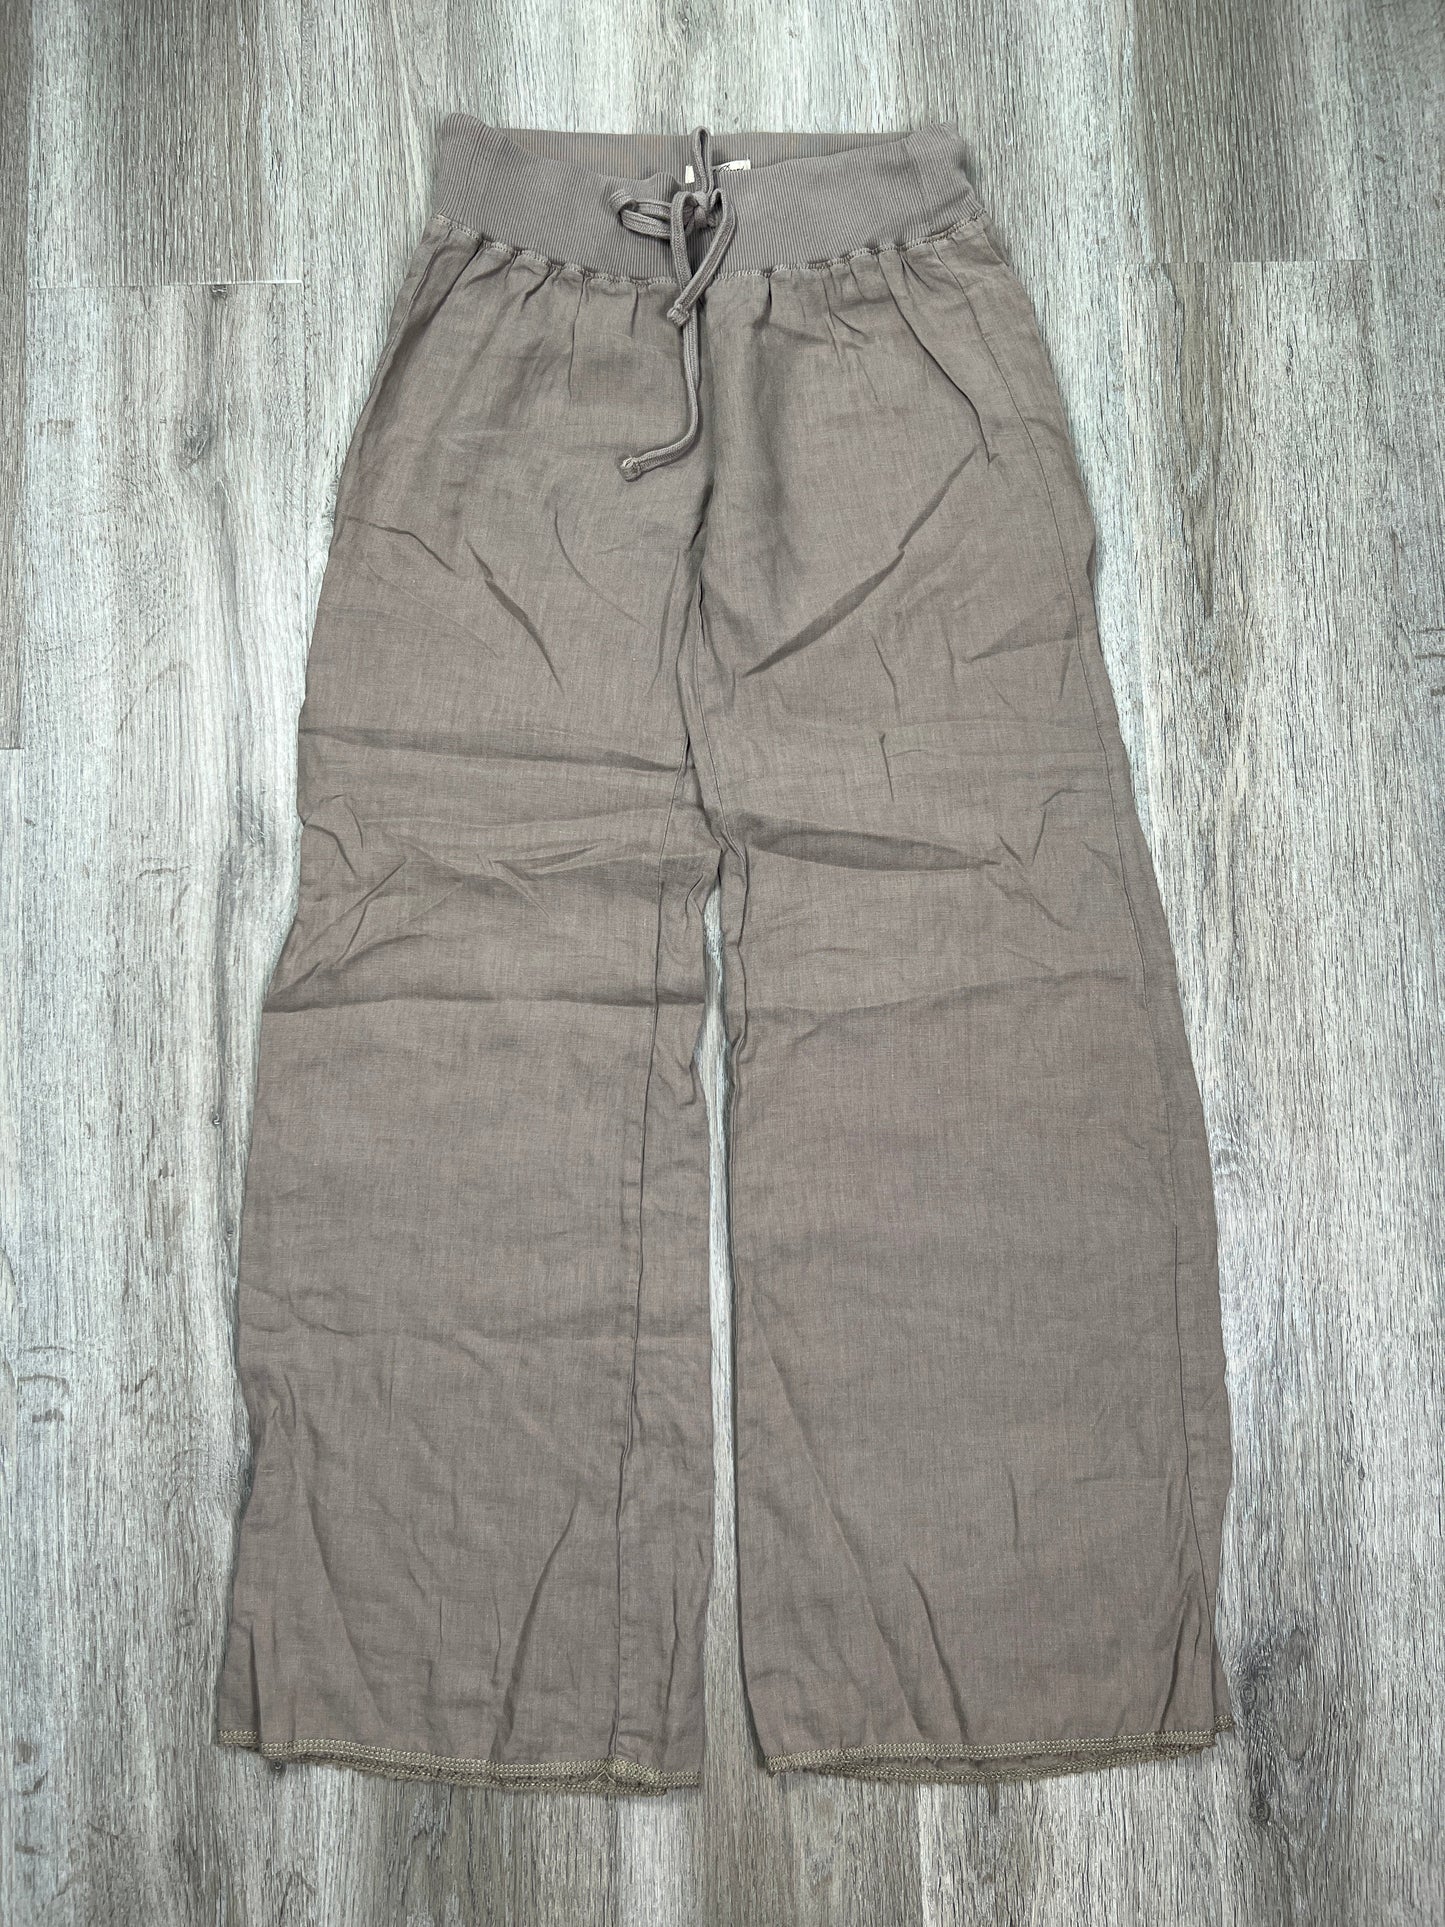 Brown Pants Linen Lucky Brand, Size S